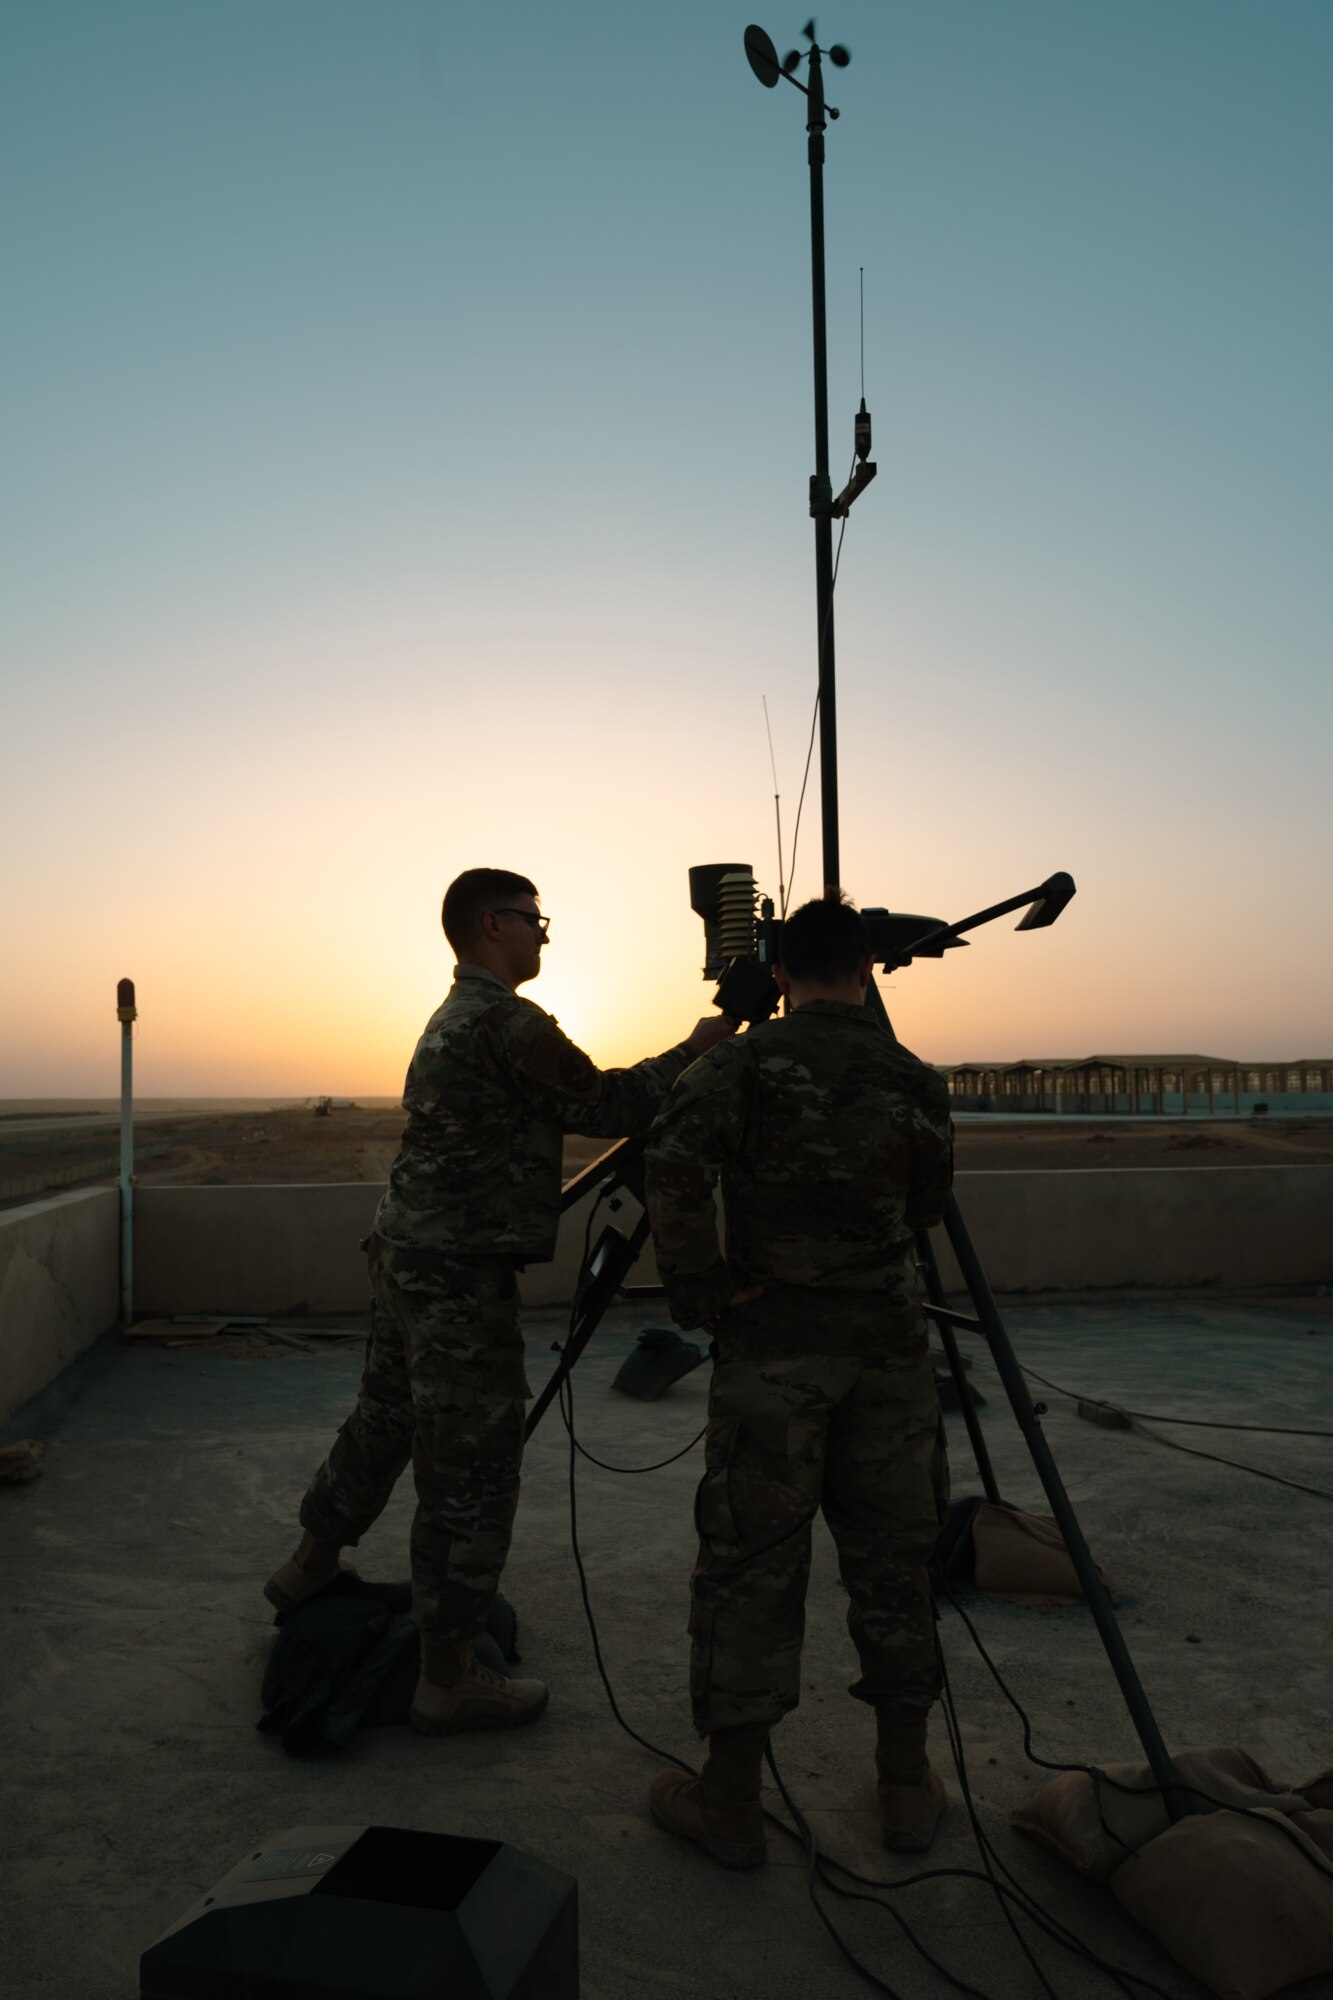 Tech. Sgt. Christopher Hahaj, Weather Flight Chief, 332d Expeditionary Operations Support Squadron, left, and Senior Airman Carmen Ricco, Forecaster, 332d Expeditionary Operations Support Squadron, work on a TMQ-53 tactical weather observing system, at an undisclosed location, Sept. 29, 2022. The TMQ-53 monitors and records current weather conditions by automating weather observations for forecasters. (U.S. Air Force photo by Tech. Sgt. Richard Mekkri)